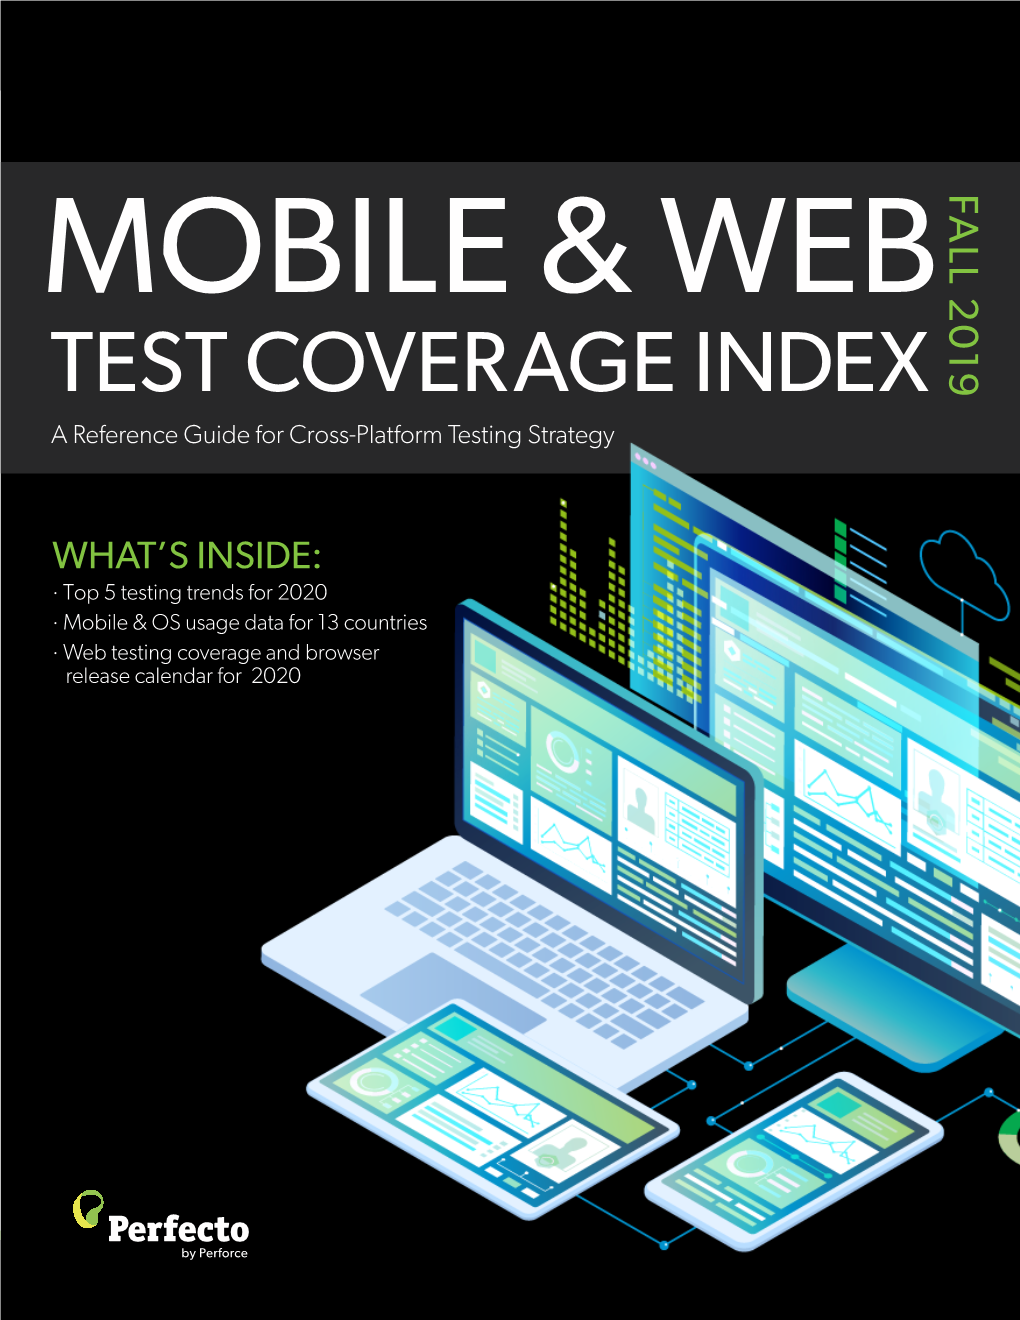 TEST COVERAGE INDEX FALL 2019 MOBILE & WEB TEST COVERAGE INDEX a Reference Guide for Cross-Platform Testing Strategy